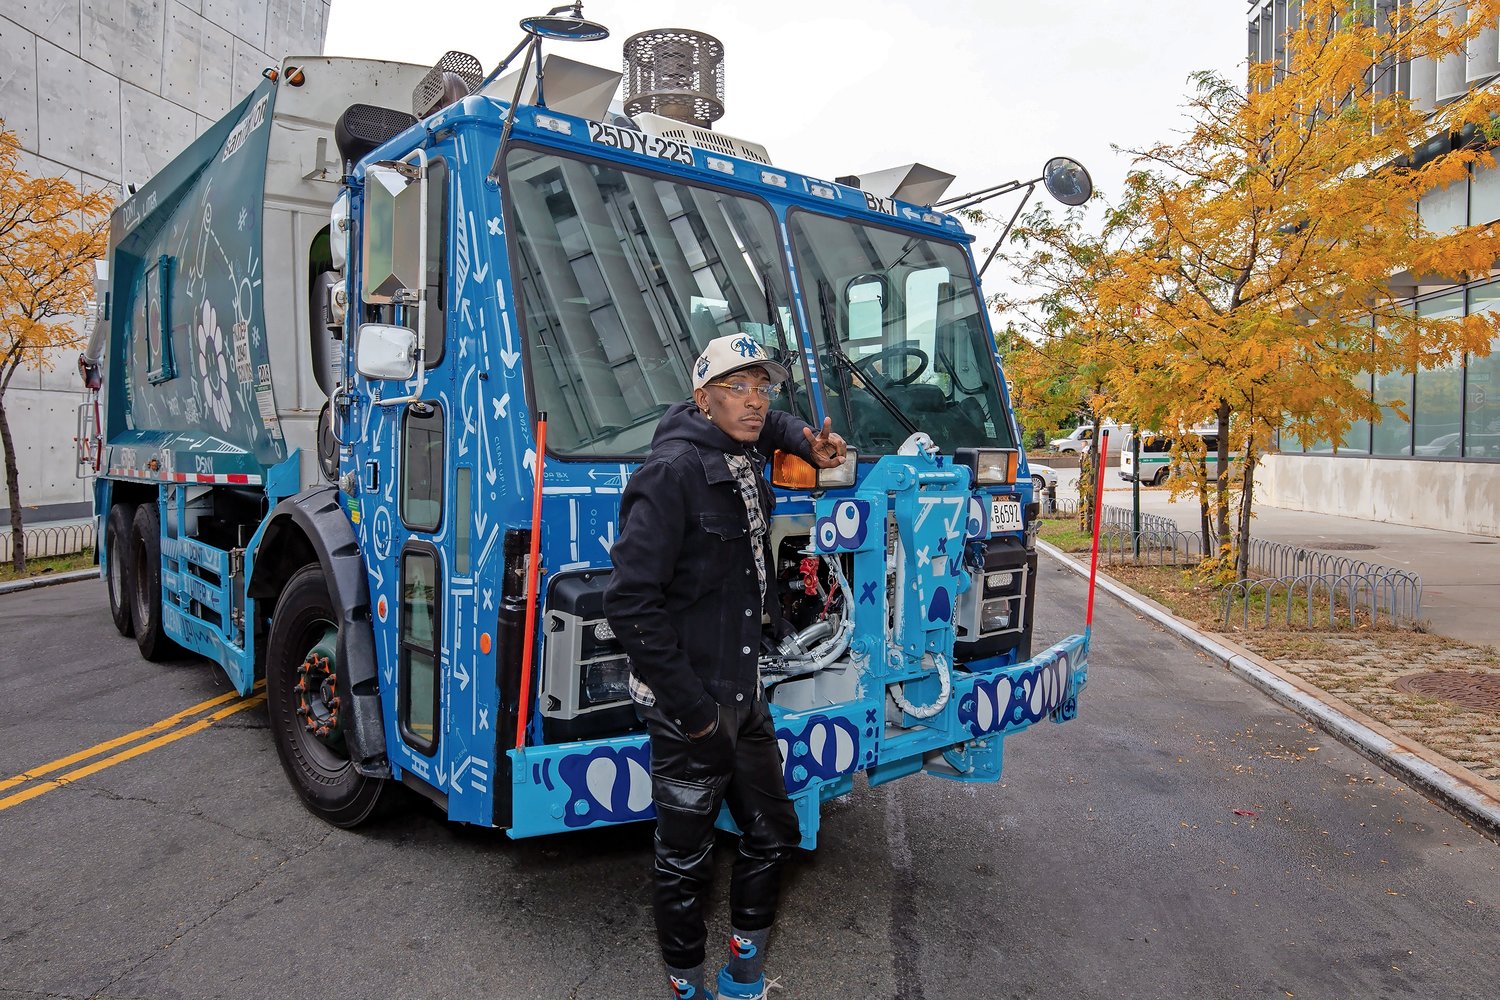 Through a truck art series, the sanitation department aimed to lighten up the streets on its routes through the five boroughs. Donnell “Jigga” McFadden was responsible for painting his home-based Bronx truck.